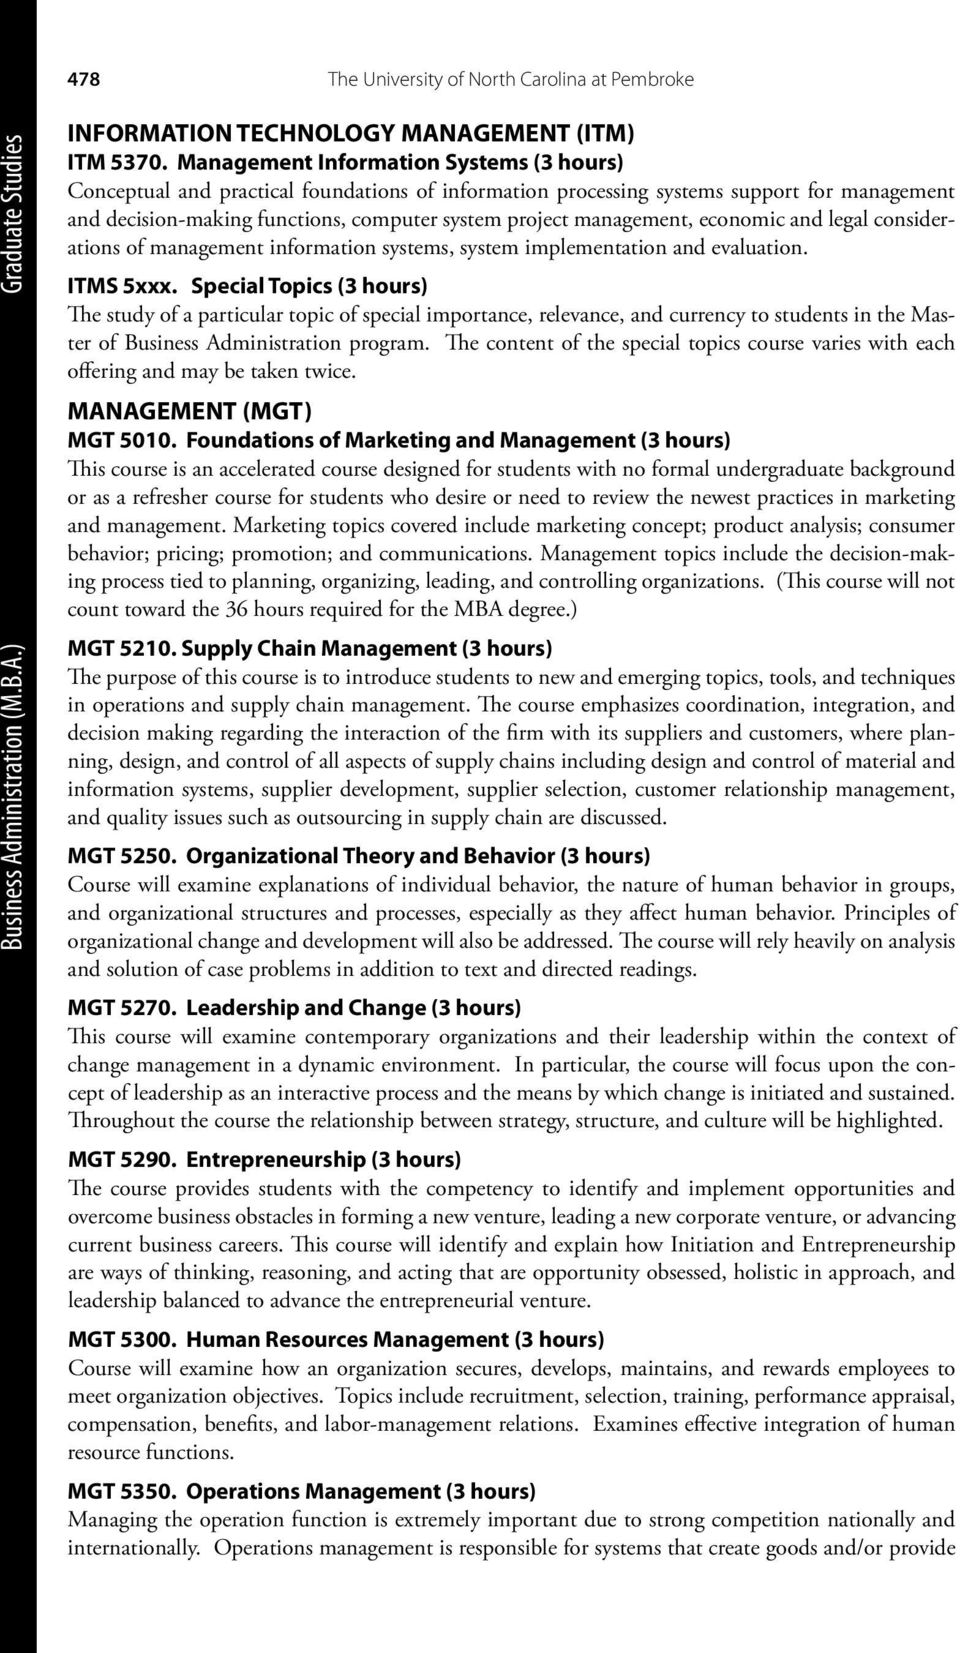 management, economic and legal considerations of management information systems, system implementation and evaluation. ITMS 5xxx. Special Topics (3 hours) MANAGEMENT (MGT) MGT 5010.